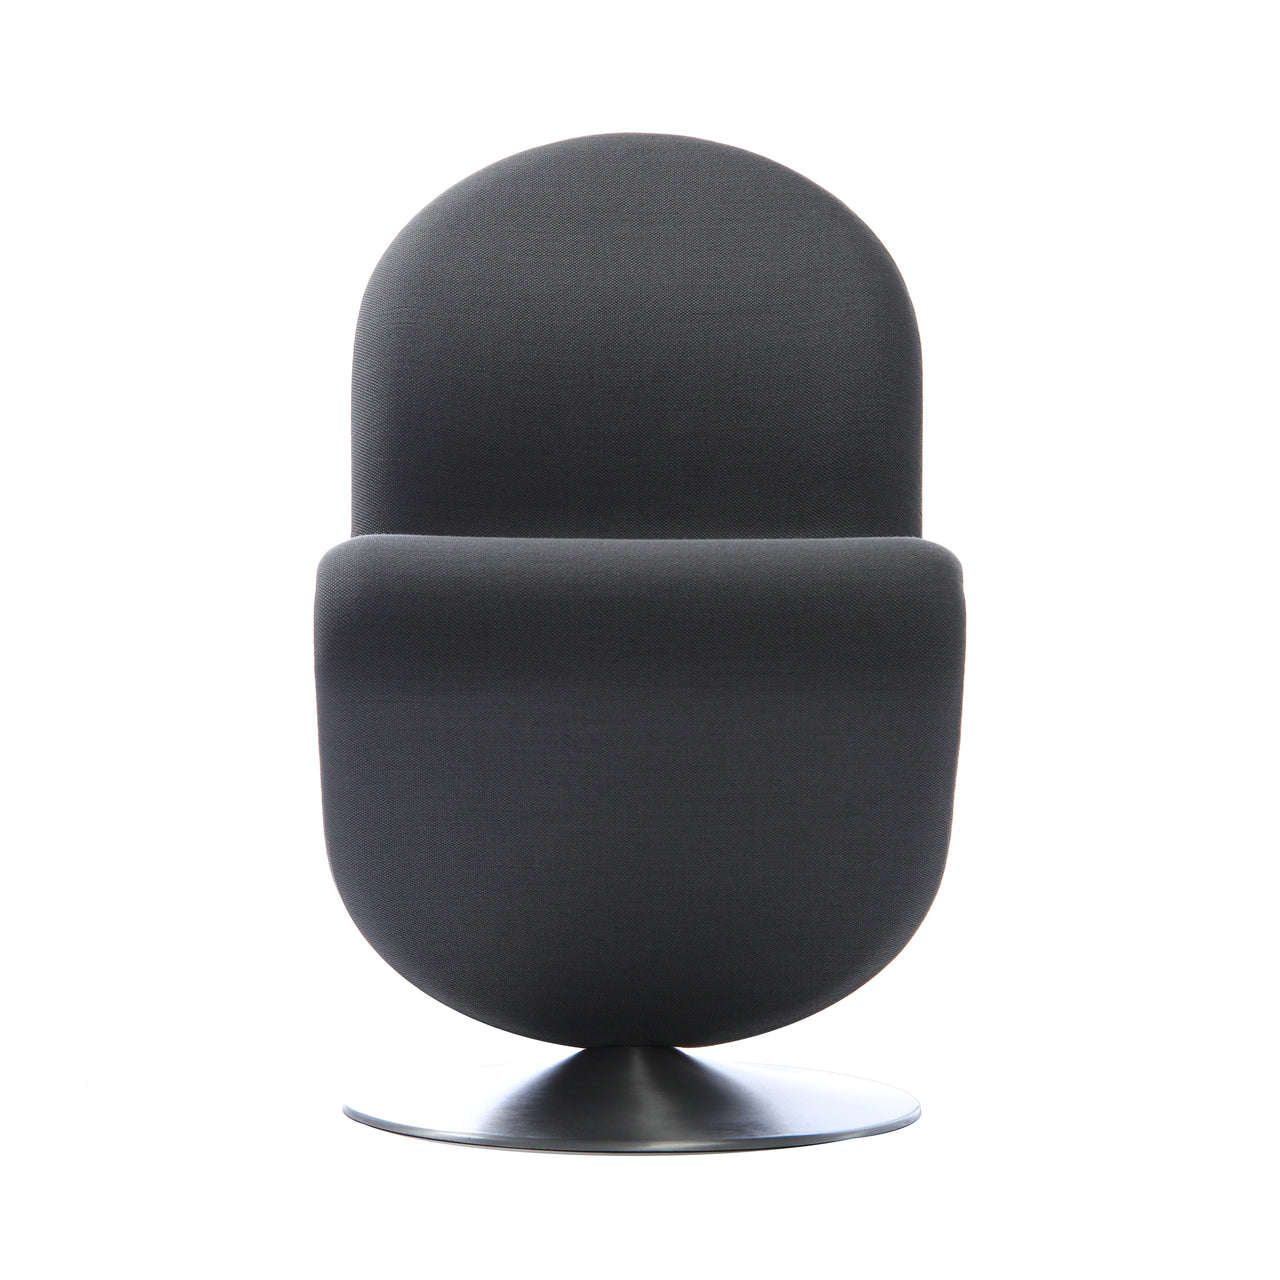 System 1-2-3 Dining Chair: Standard + Round